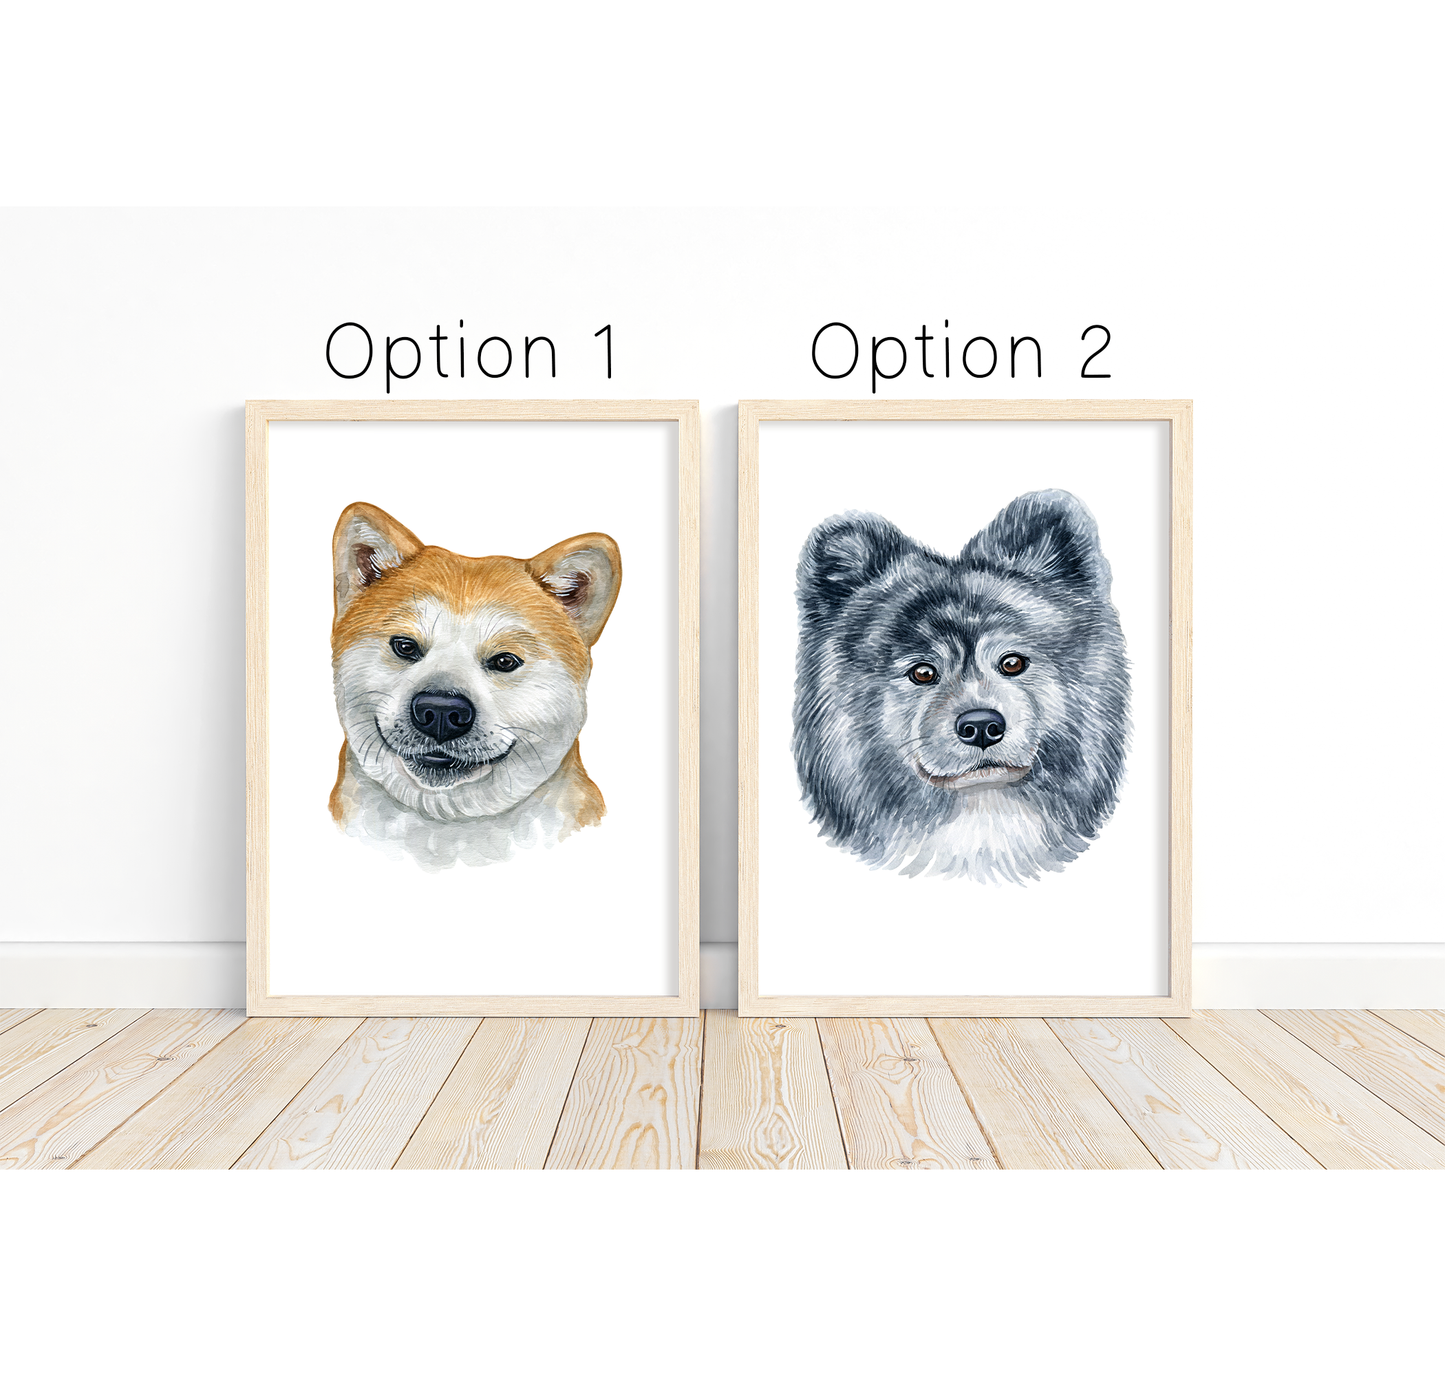 Japanese Akita artwork - charming dog portraits with custom funny or heart warming message | A4 | A5 | Greeting card